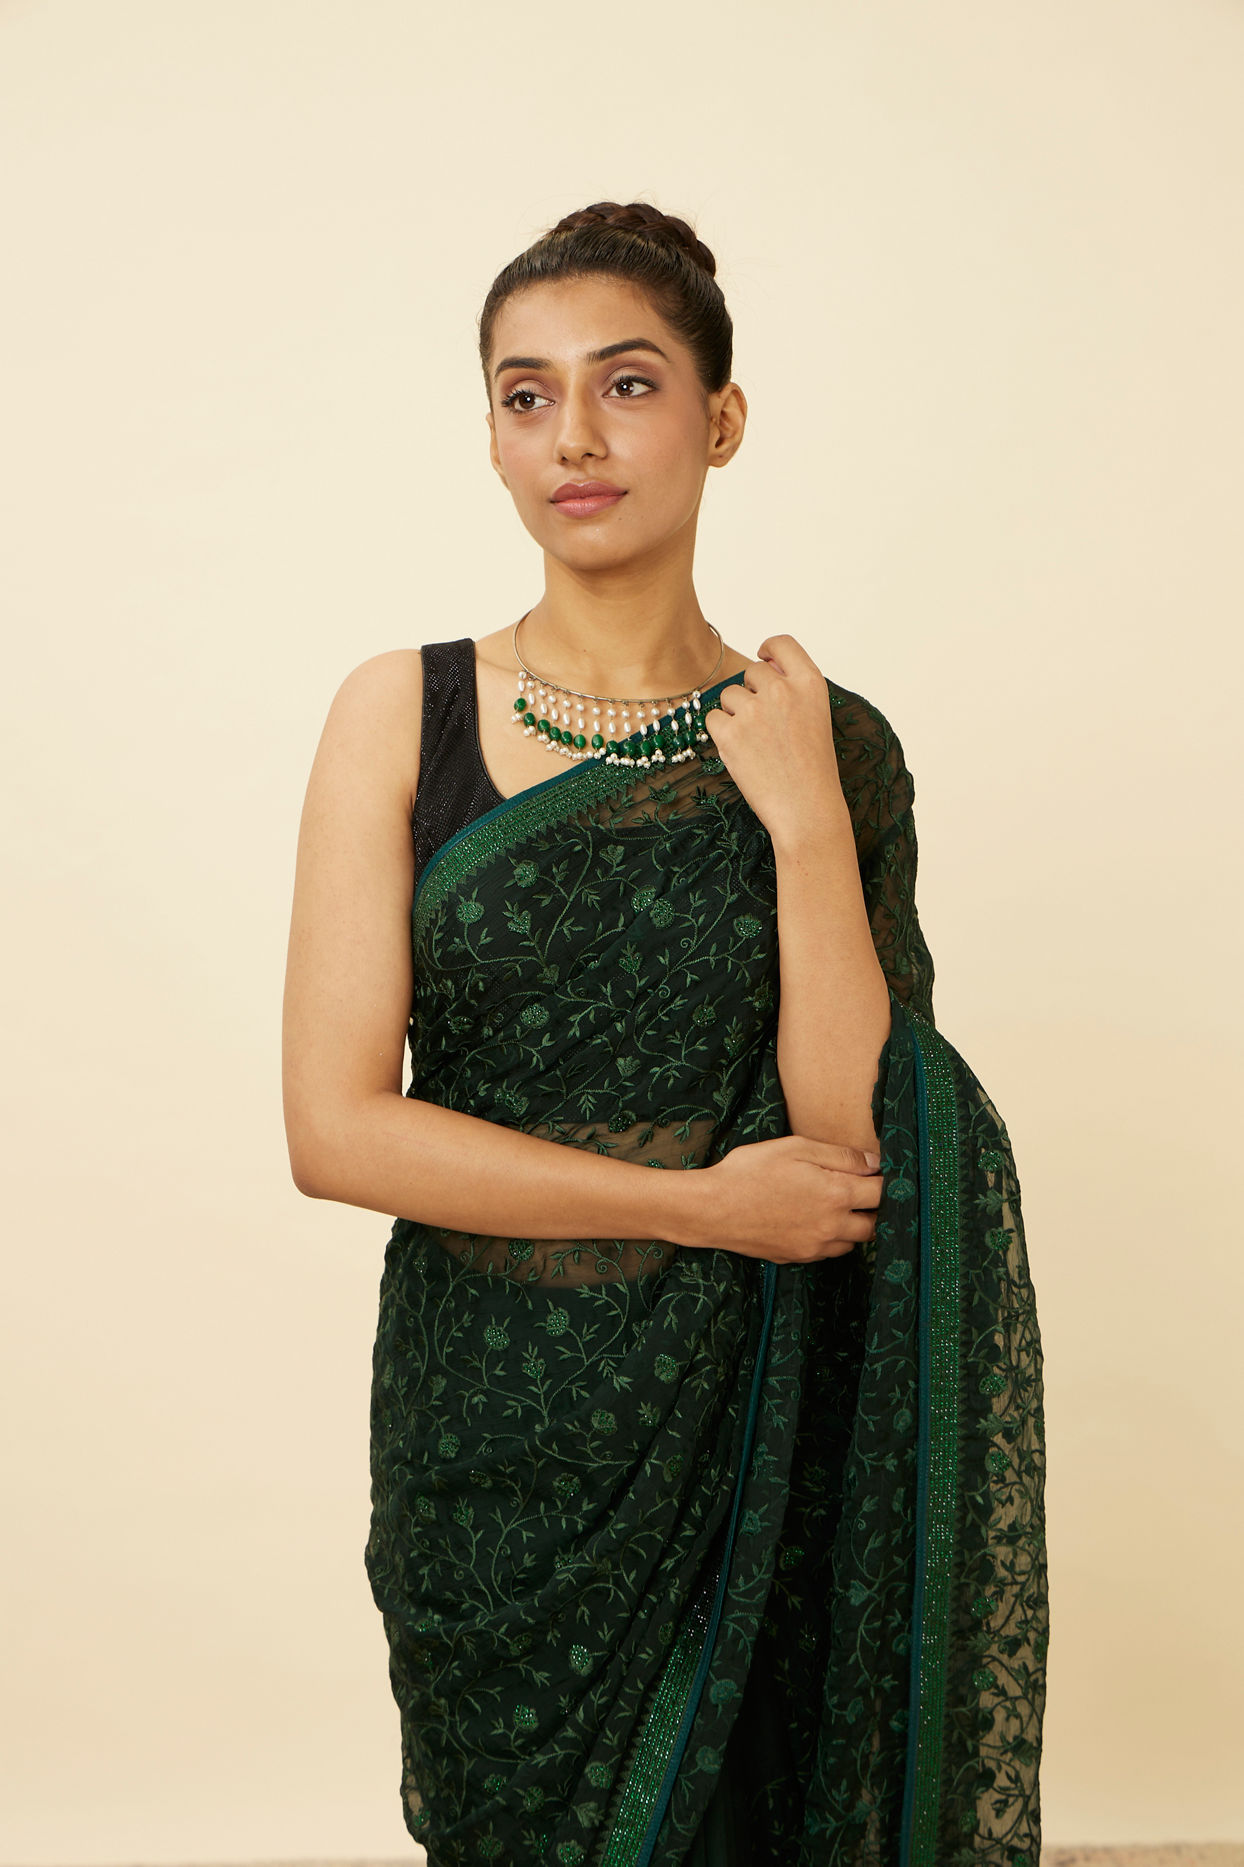 Buy Bottle Green Patterned Saree with Embellished Borders Online